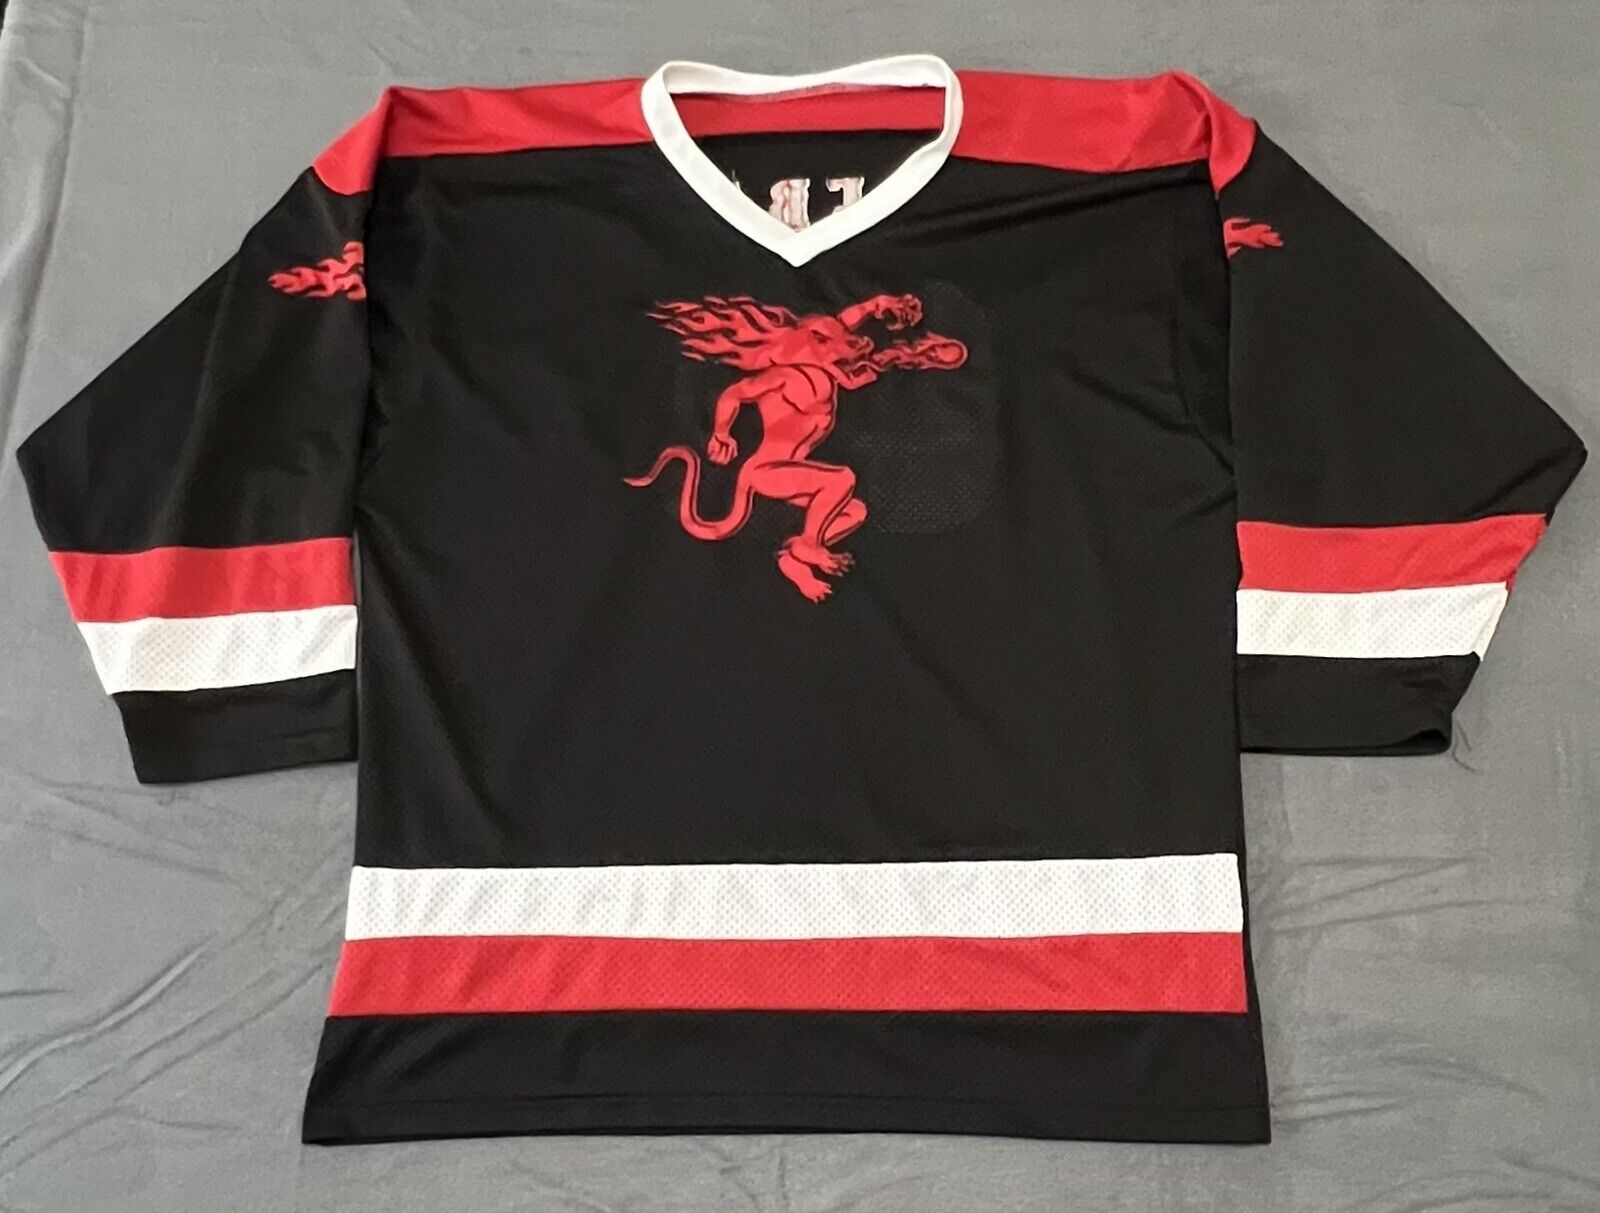 Fireball Whisky Red Dragon Hockey Jersey Stitched Lettering #66 Size Medium